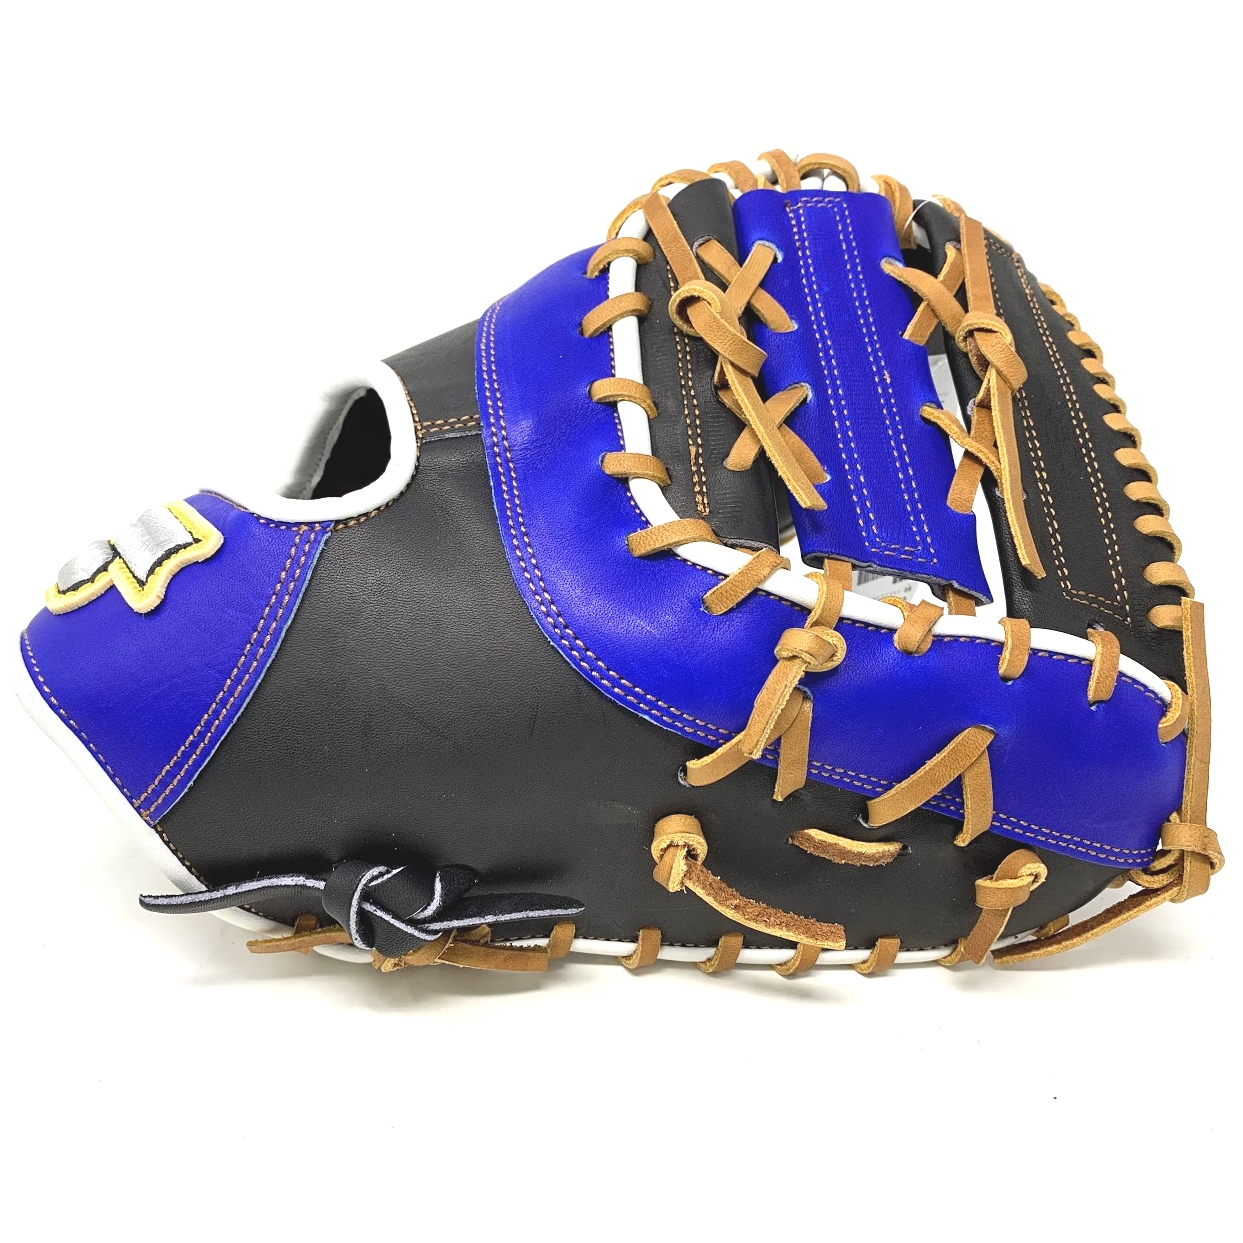 ssk-taiwan-silver-series-13-inch-baseball-first-base-mitt-black-royal-right-hand-throw DWGF4721-BKRY-RightHandThrow SSK  The SSK Taiwan Silver Series is made for players who had